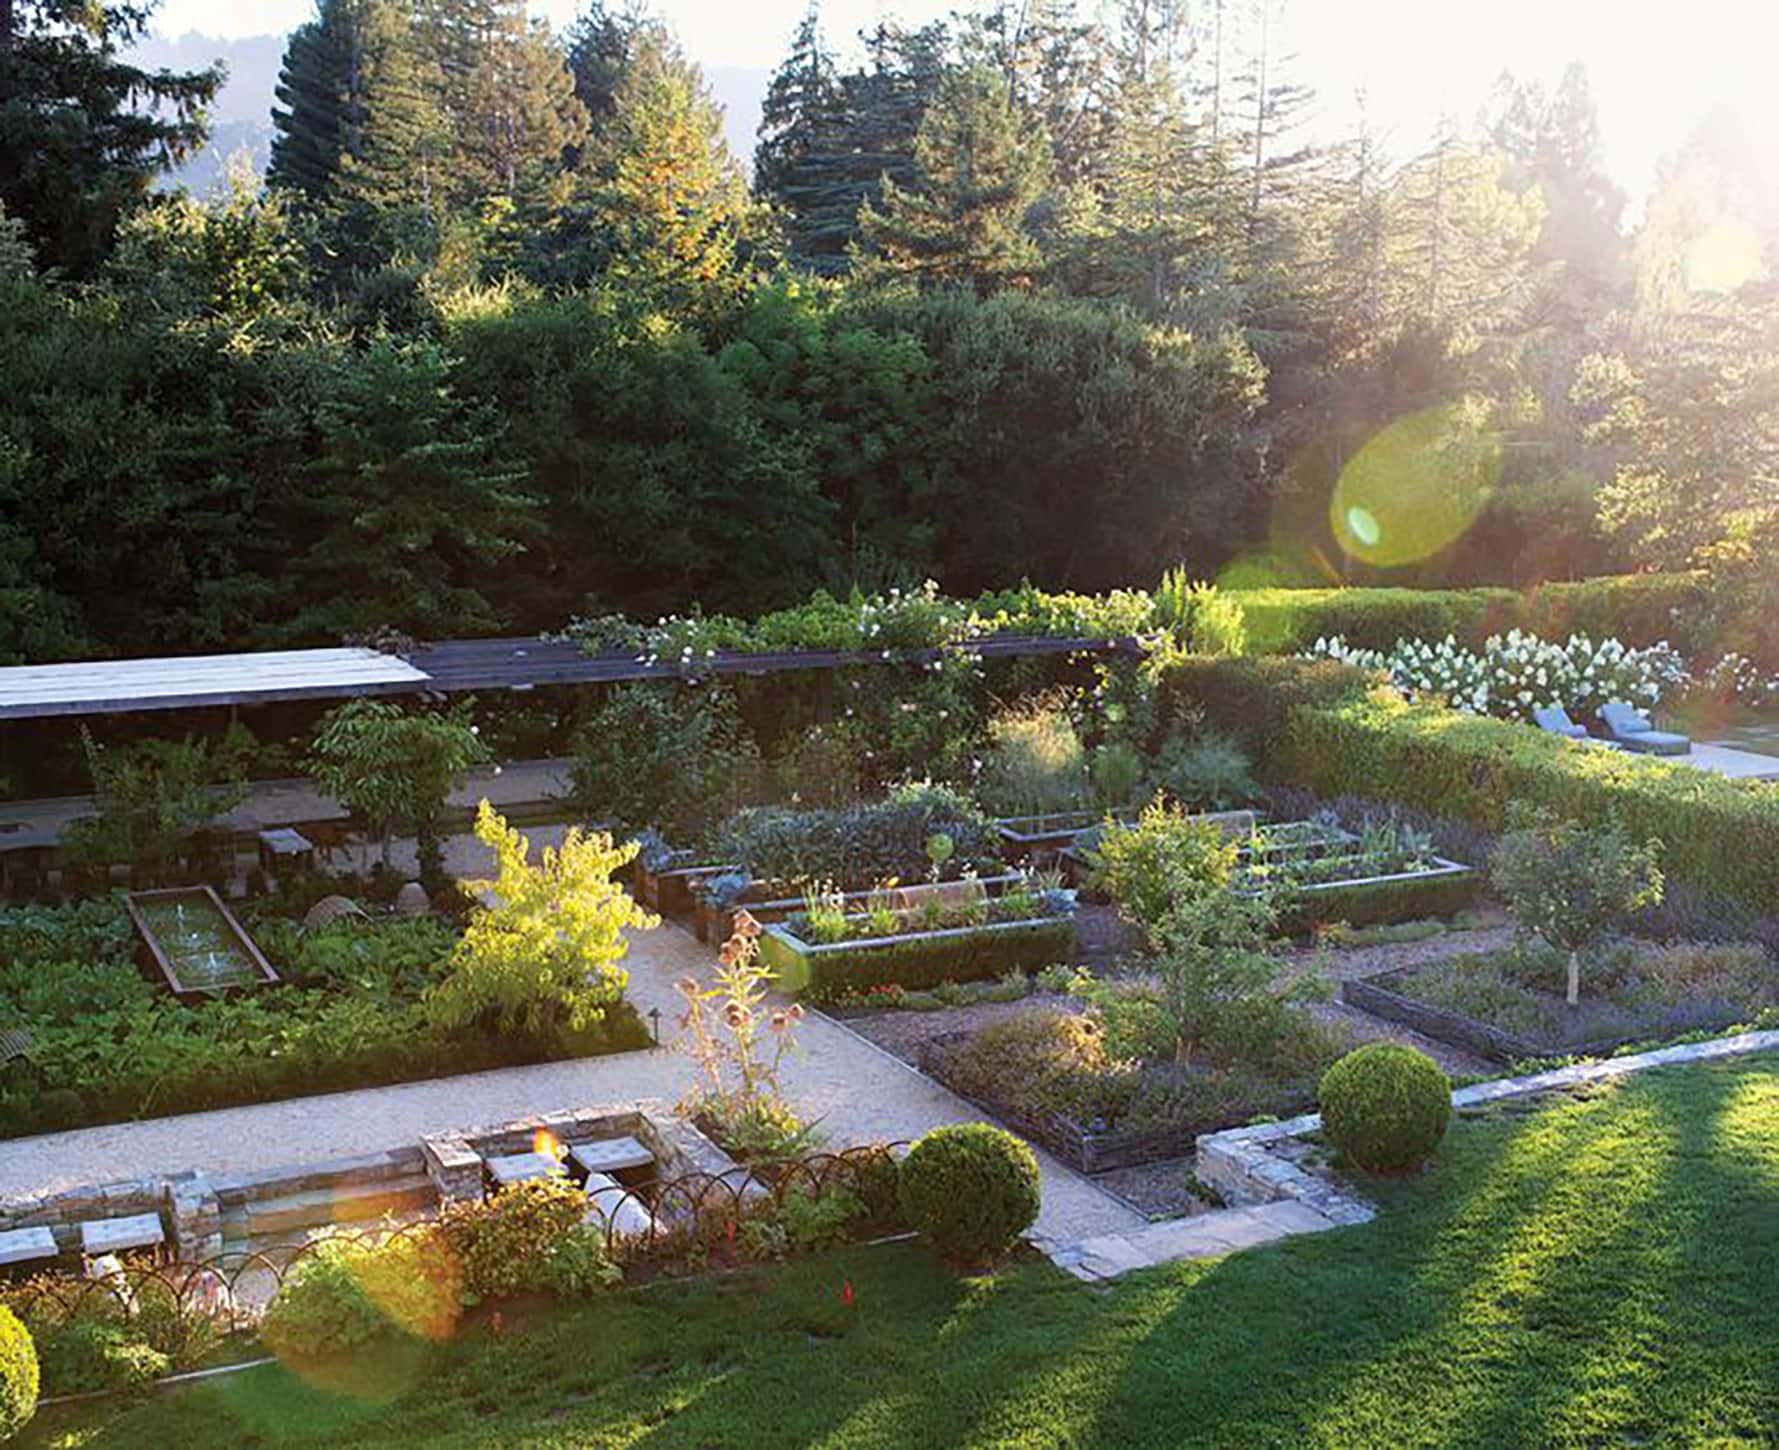 MARK SIKES PORTOLA VALLEY PROJECT GARDEN ON CINDY HATTERSLEY'S BLOG